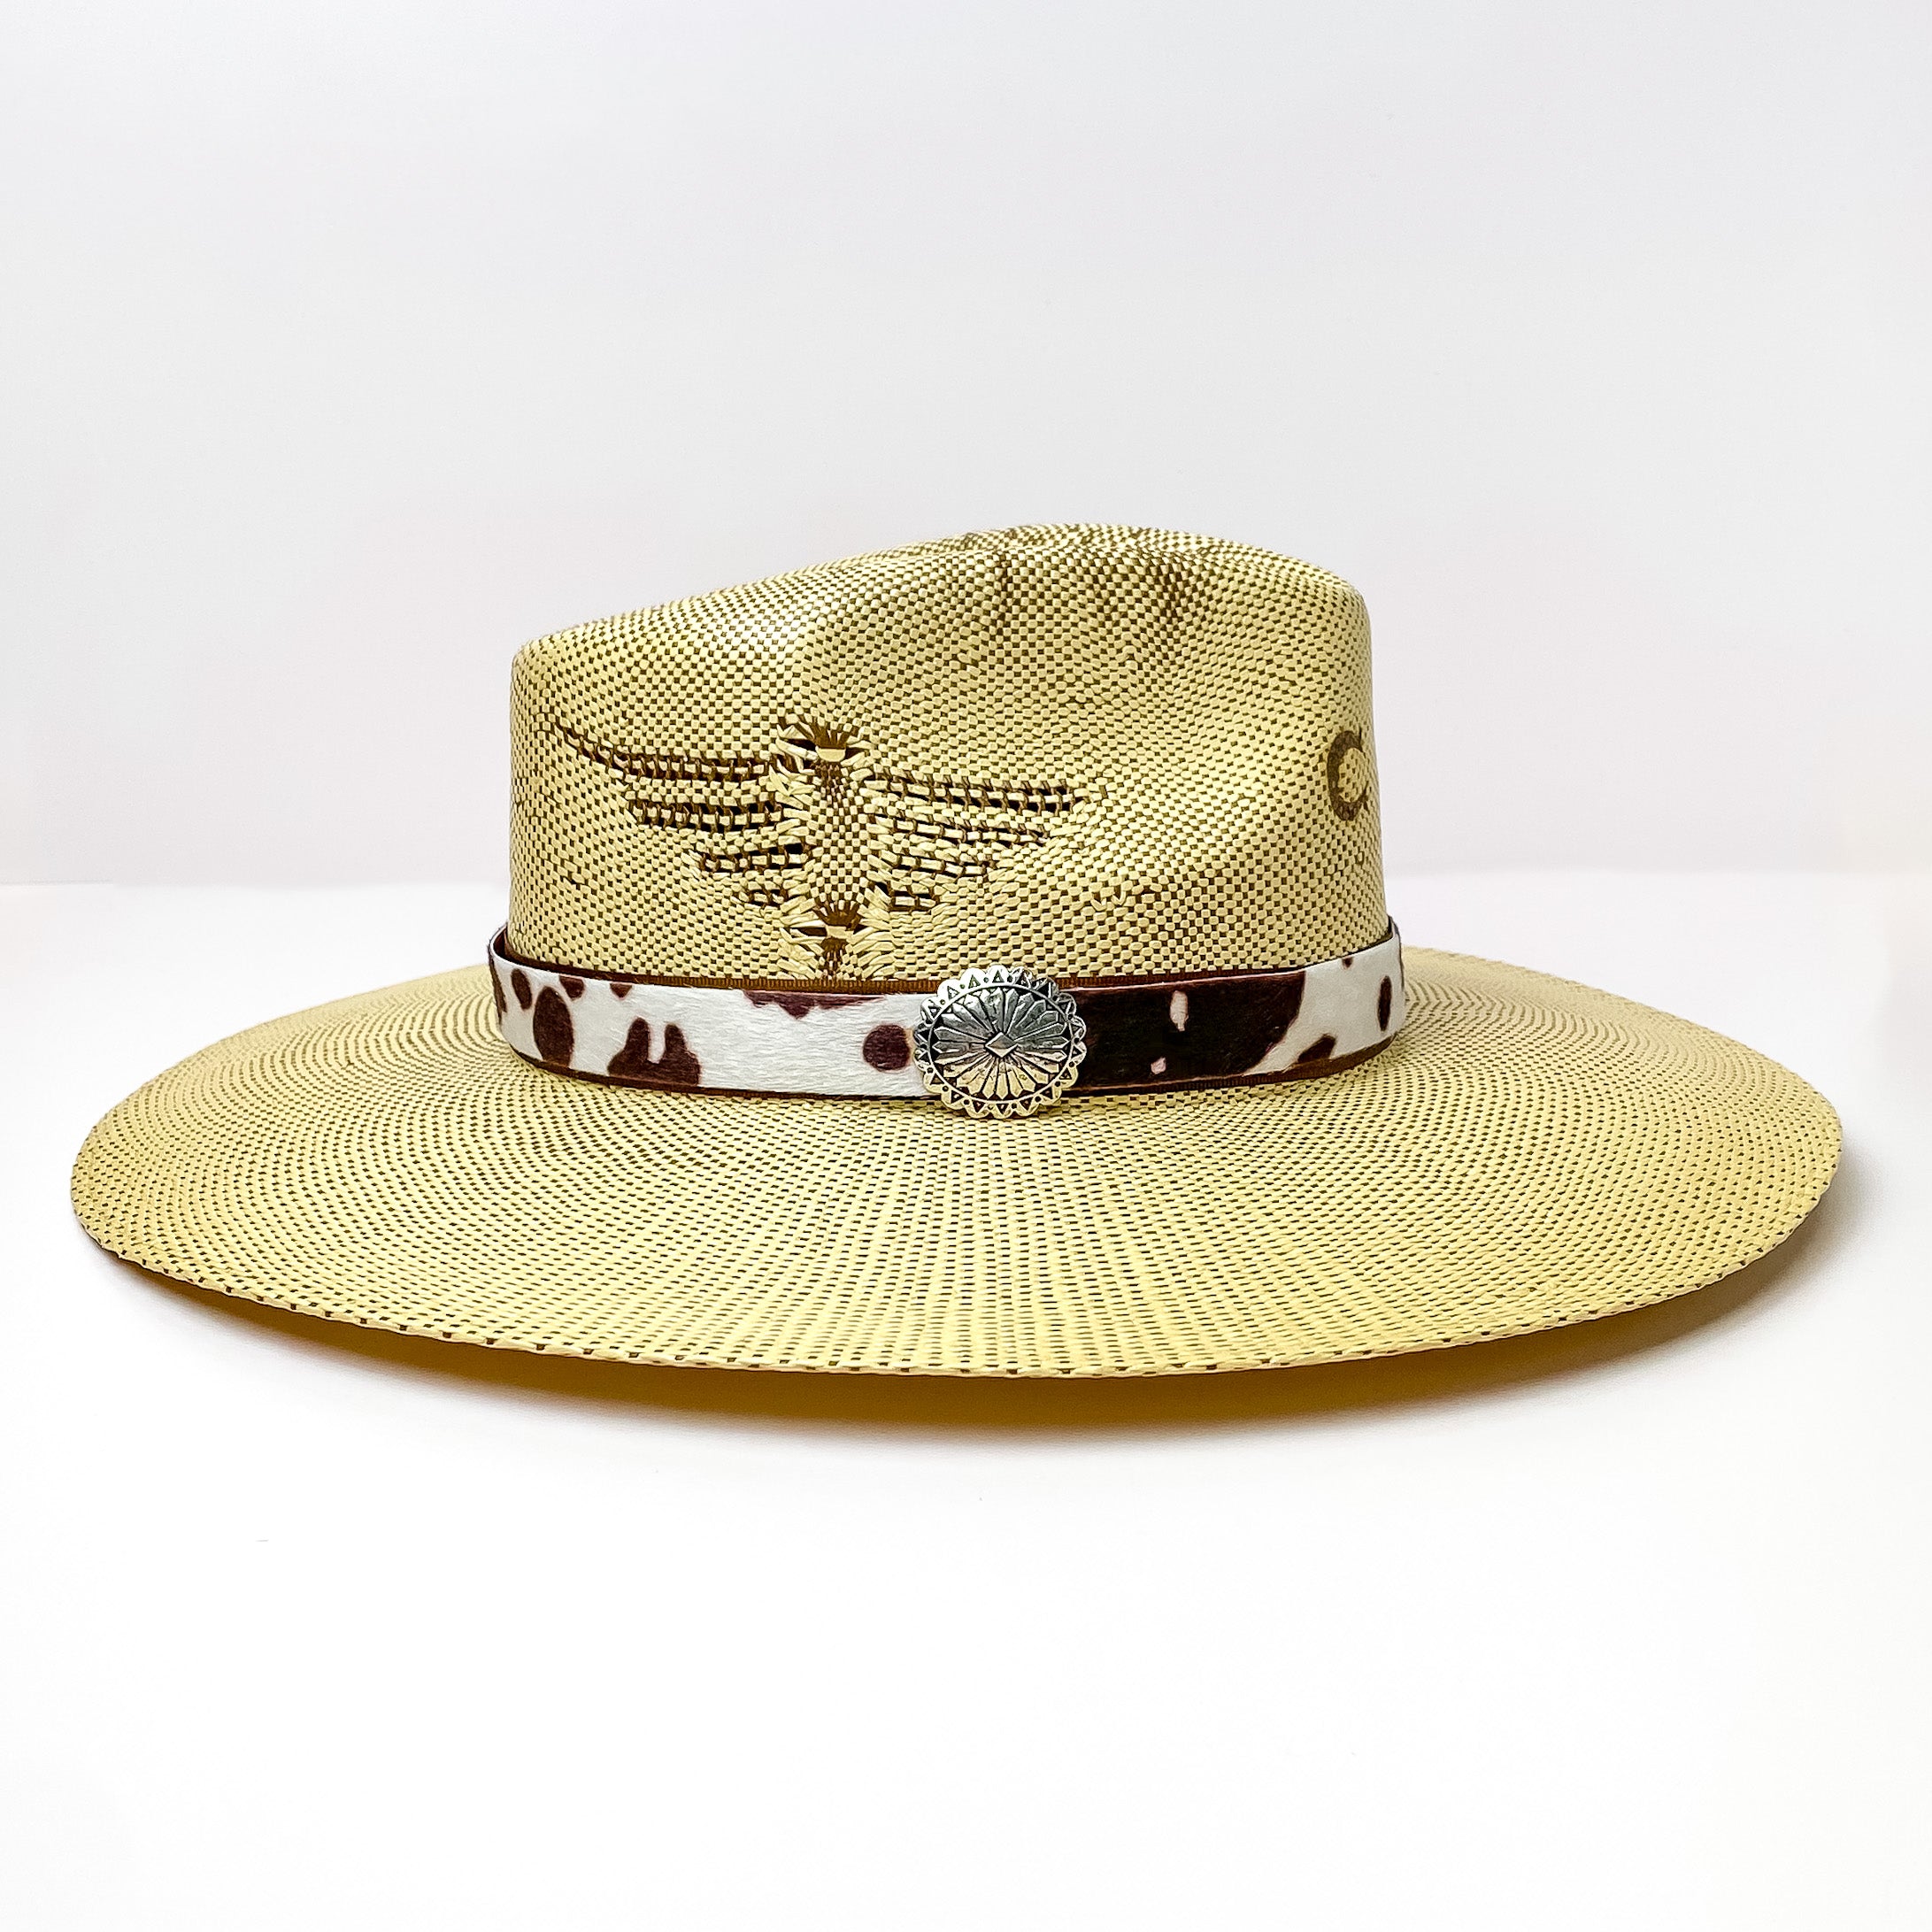 Back Road Chillin Cow Print Hat Band in Dark Brown/Silver Tone - Giddy Up Glamour Boutique